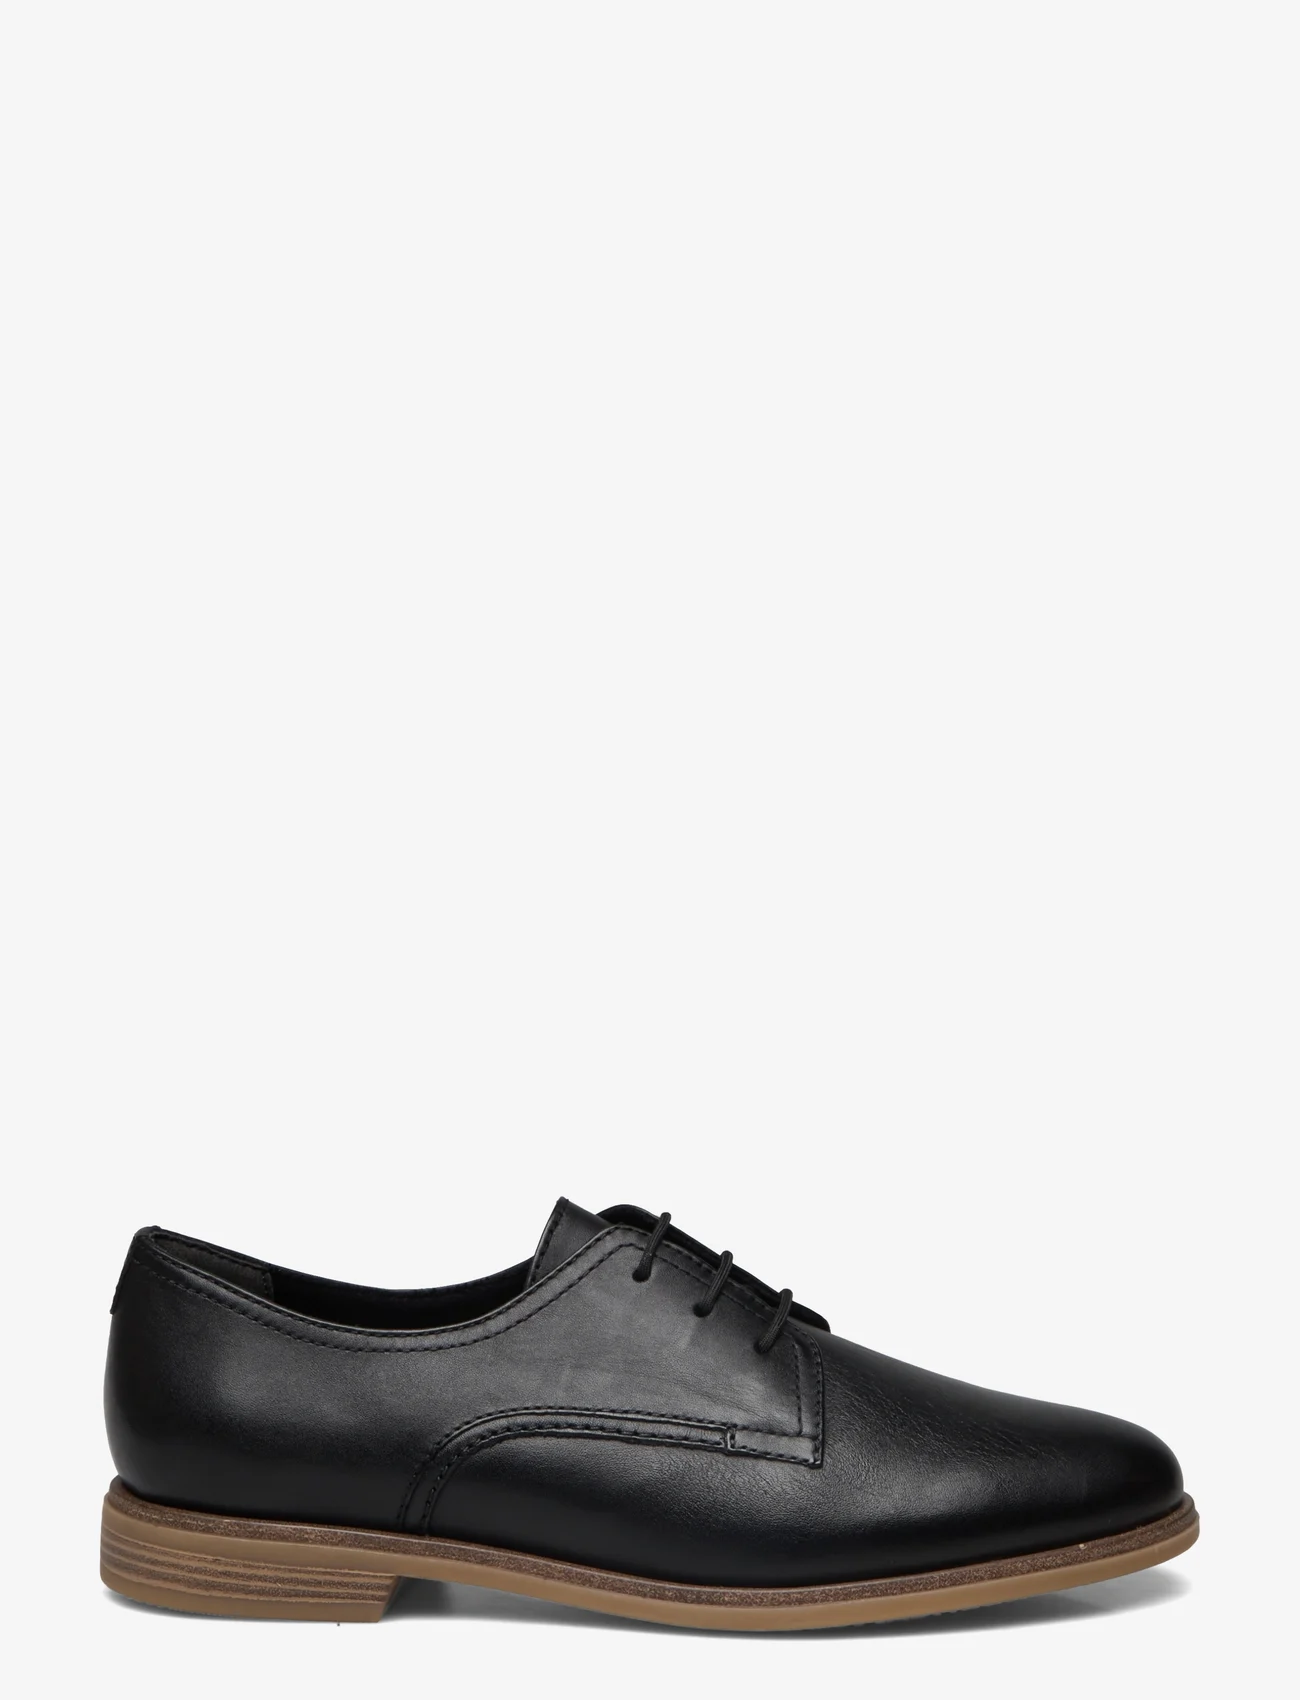 Tamaris - Woms Lace-up - flats - black leather - 1